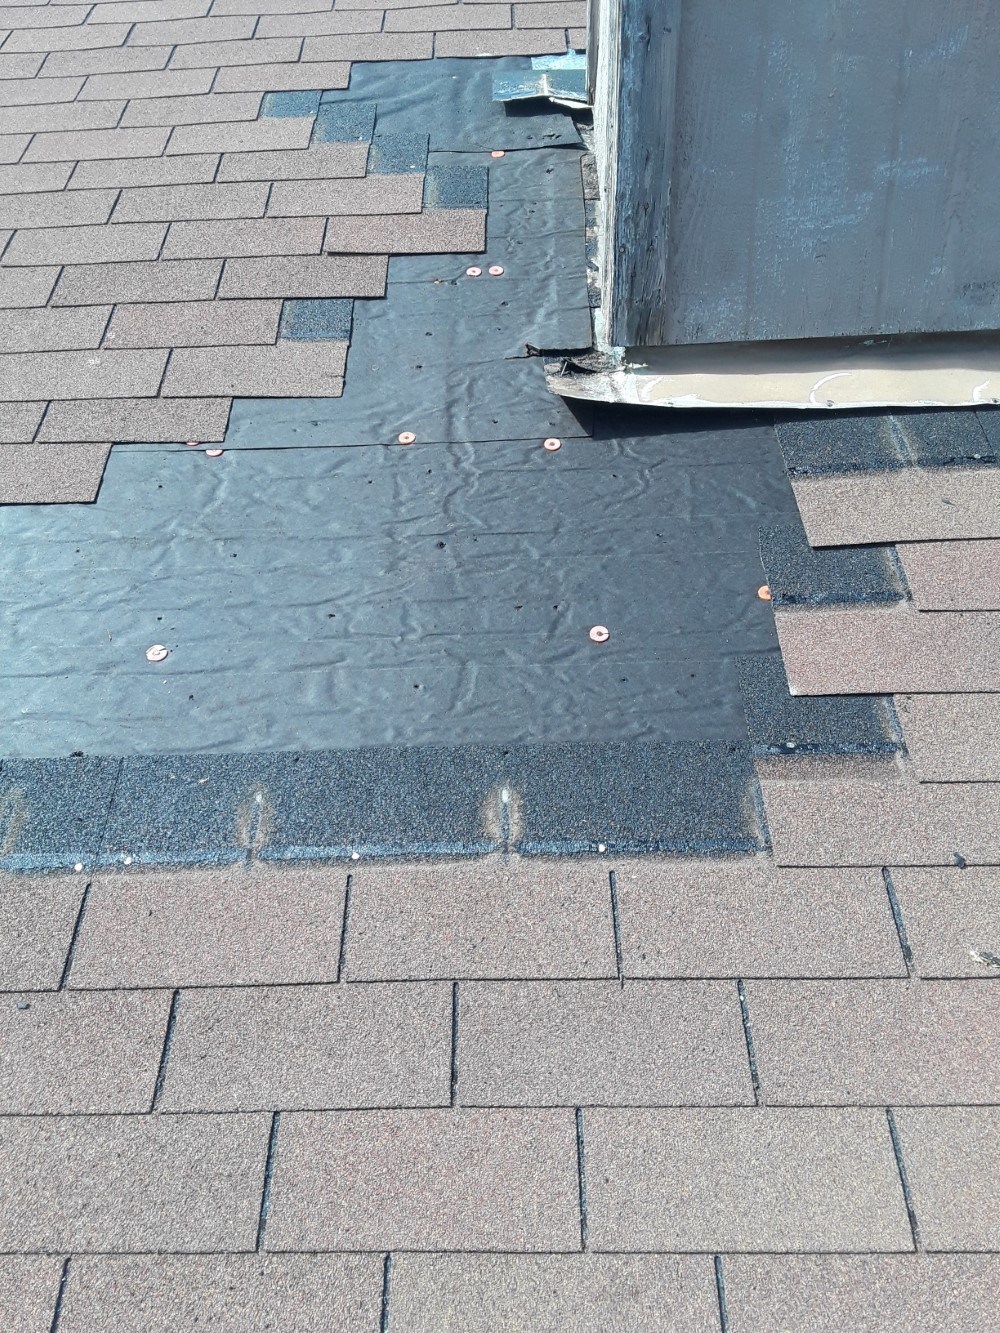 Repair and replace damage shingles shingles removed and can see good underlayment